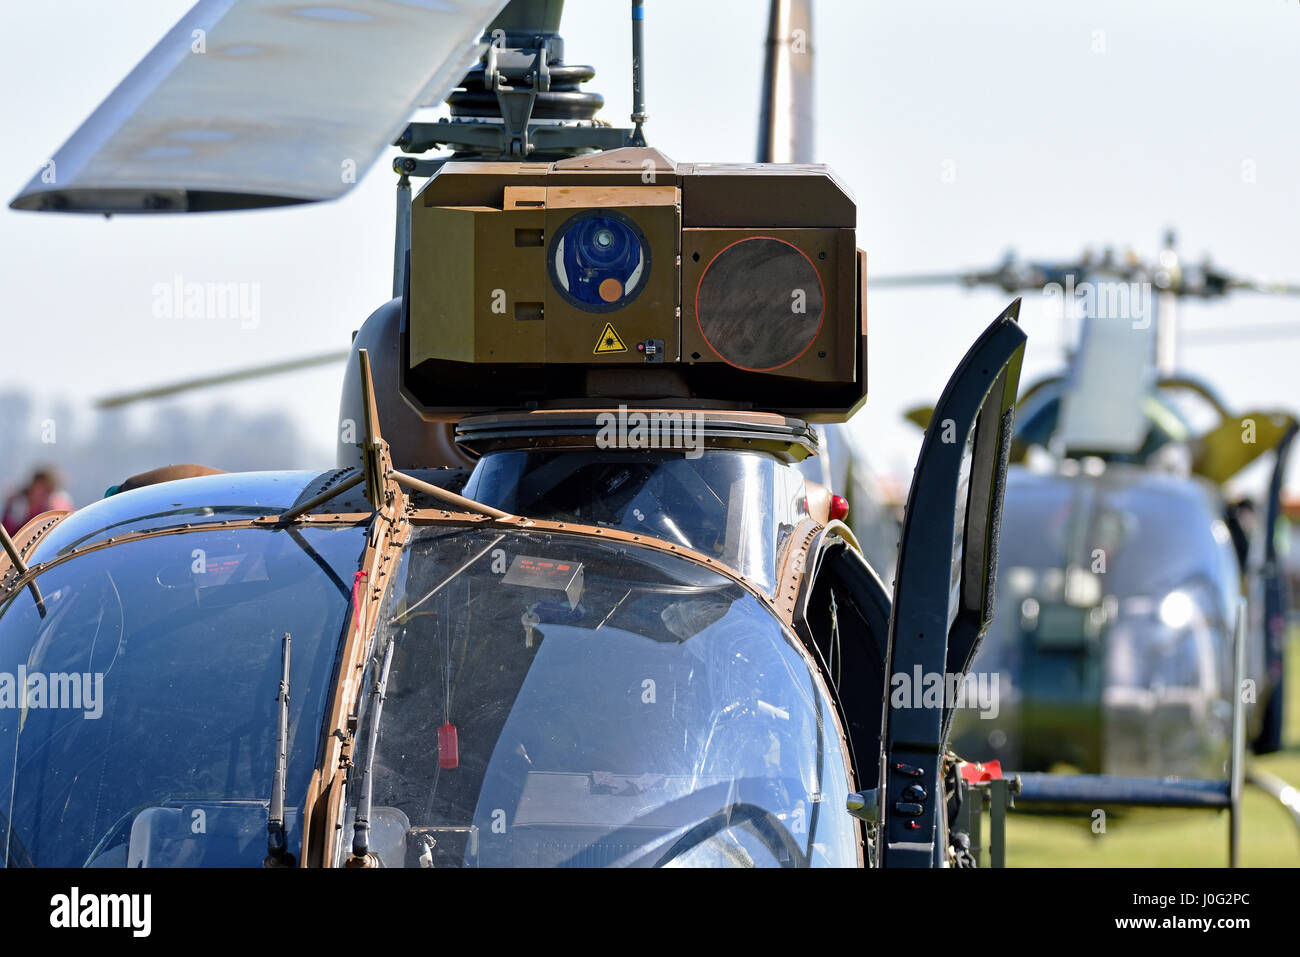 french-army-aerospatiale-gazelle-sa341-helicopter-seen-here-at-the-J0G2PC.jpg